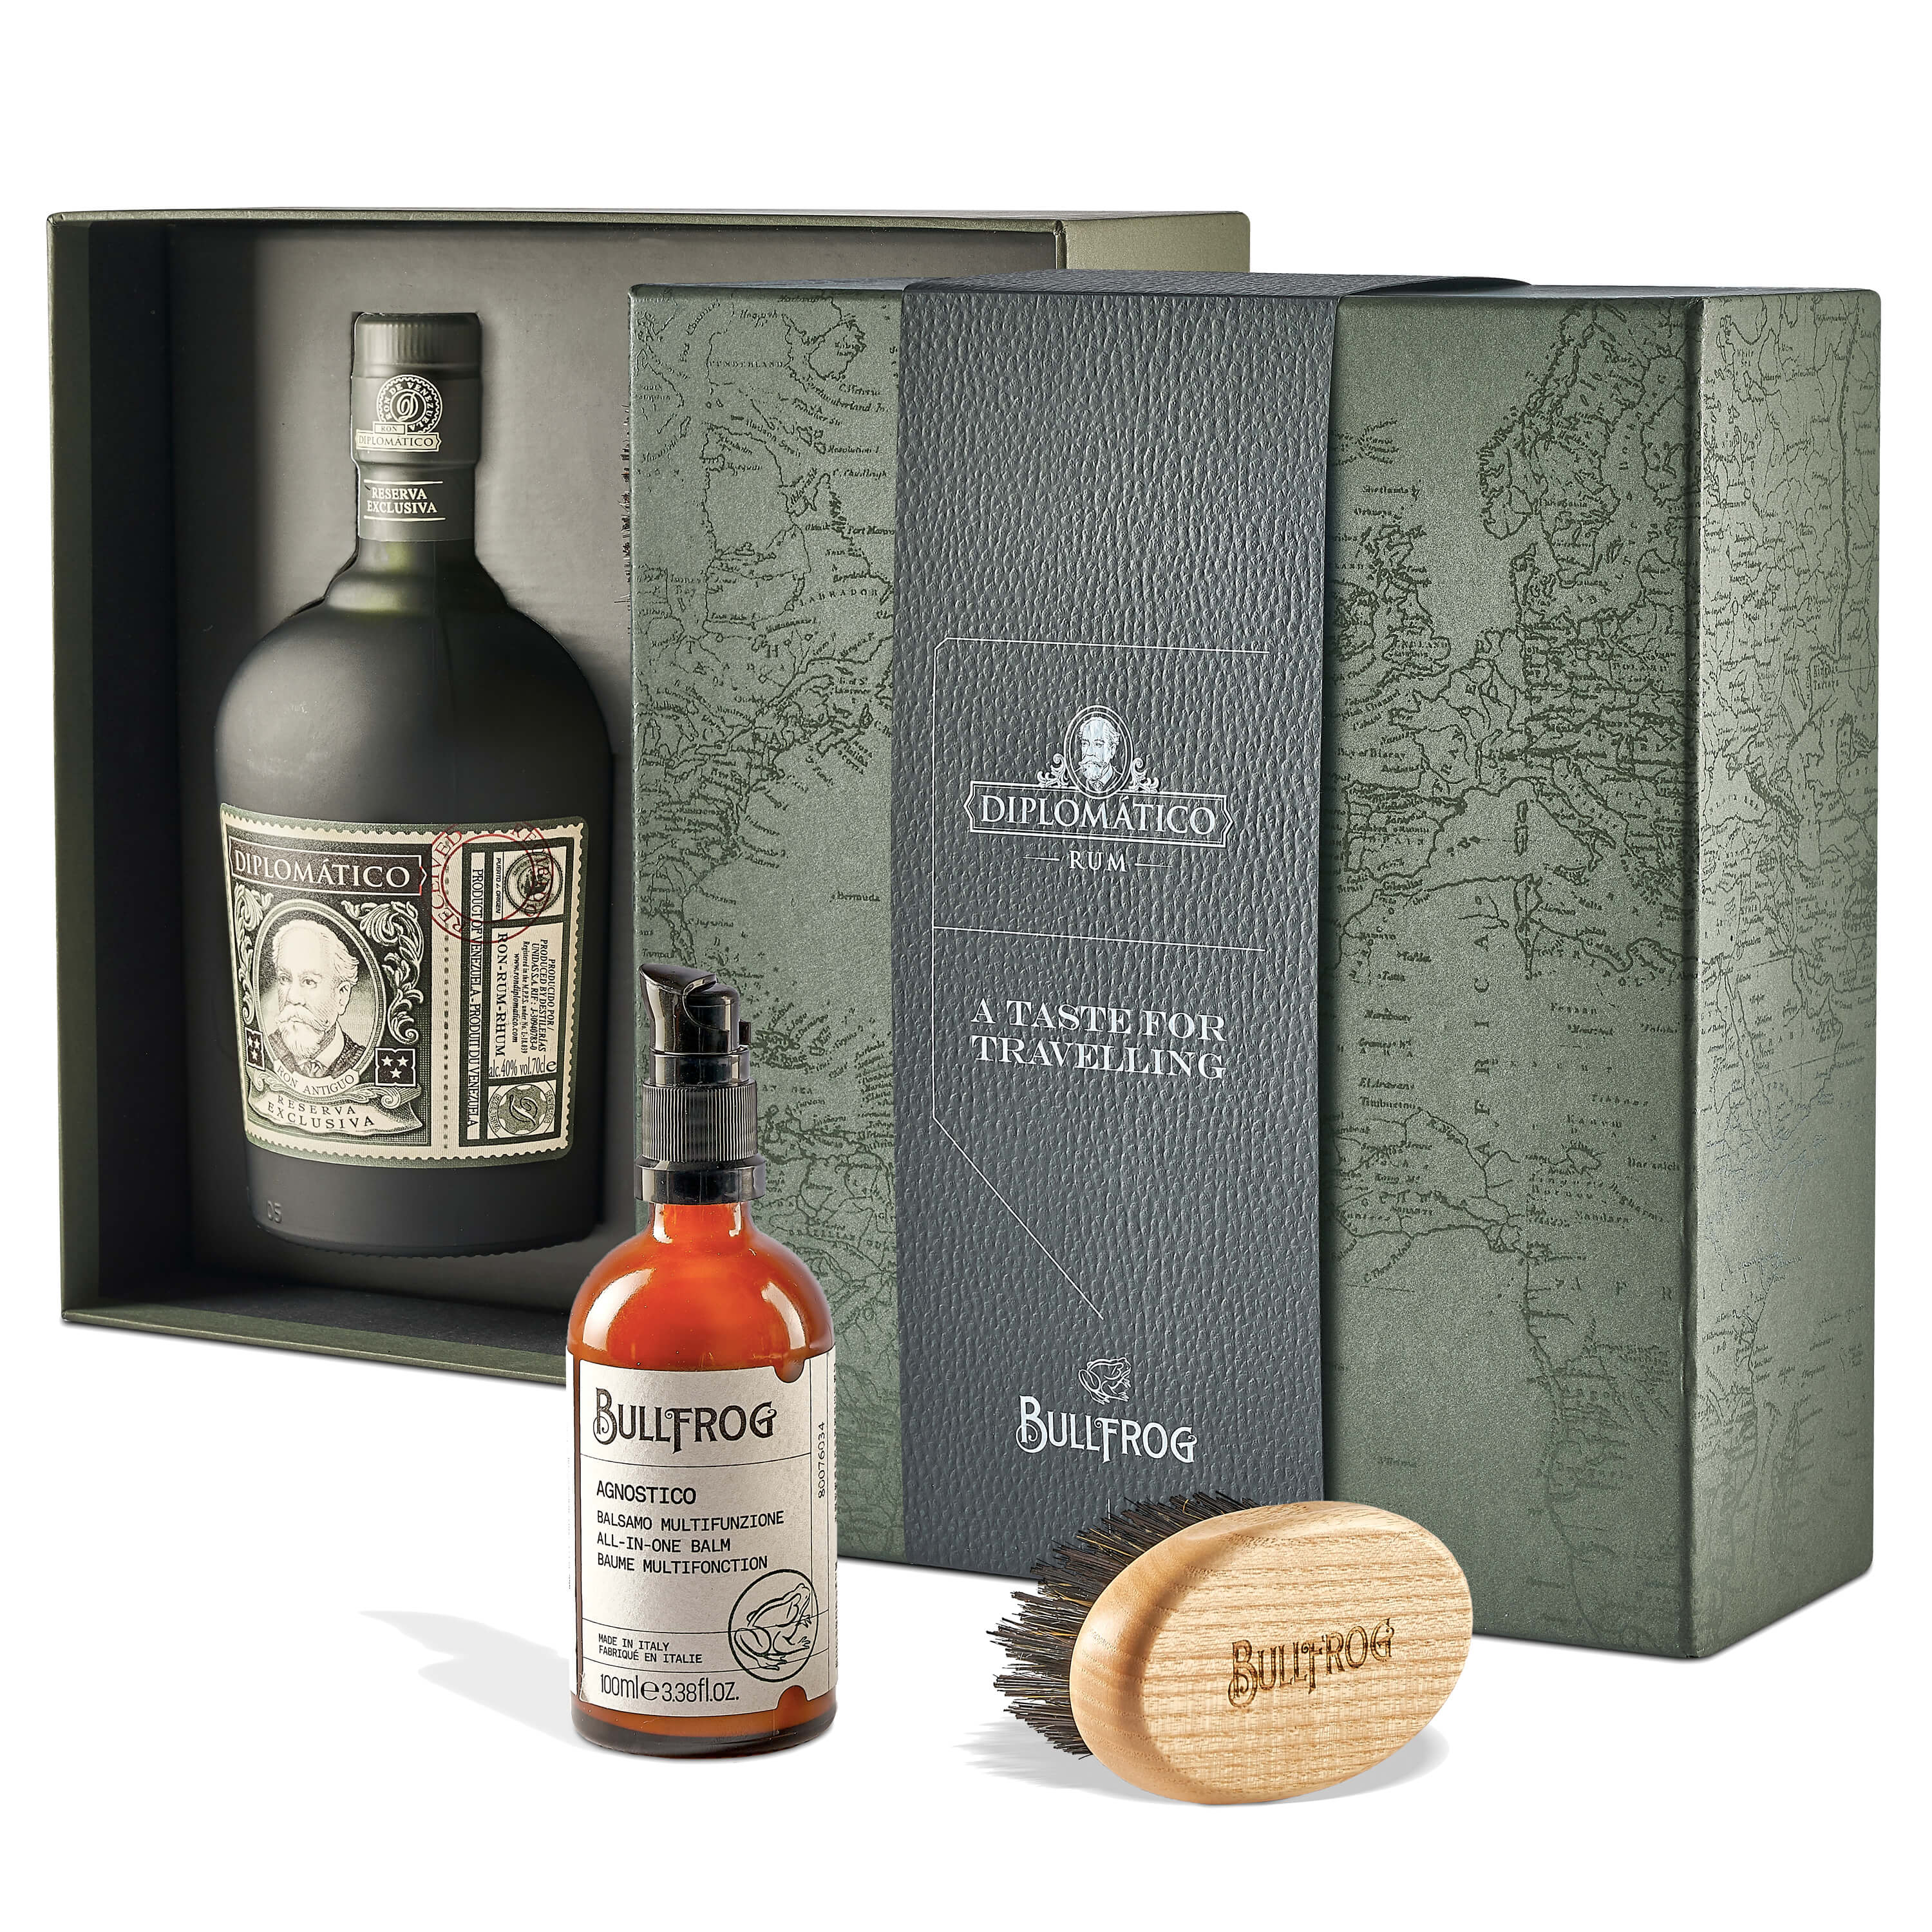 Rum Reserva Exclusiva A Taste for Travelling - Diplomático (0.7l - gift  box)